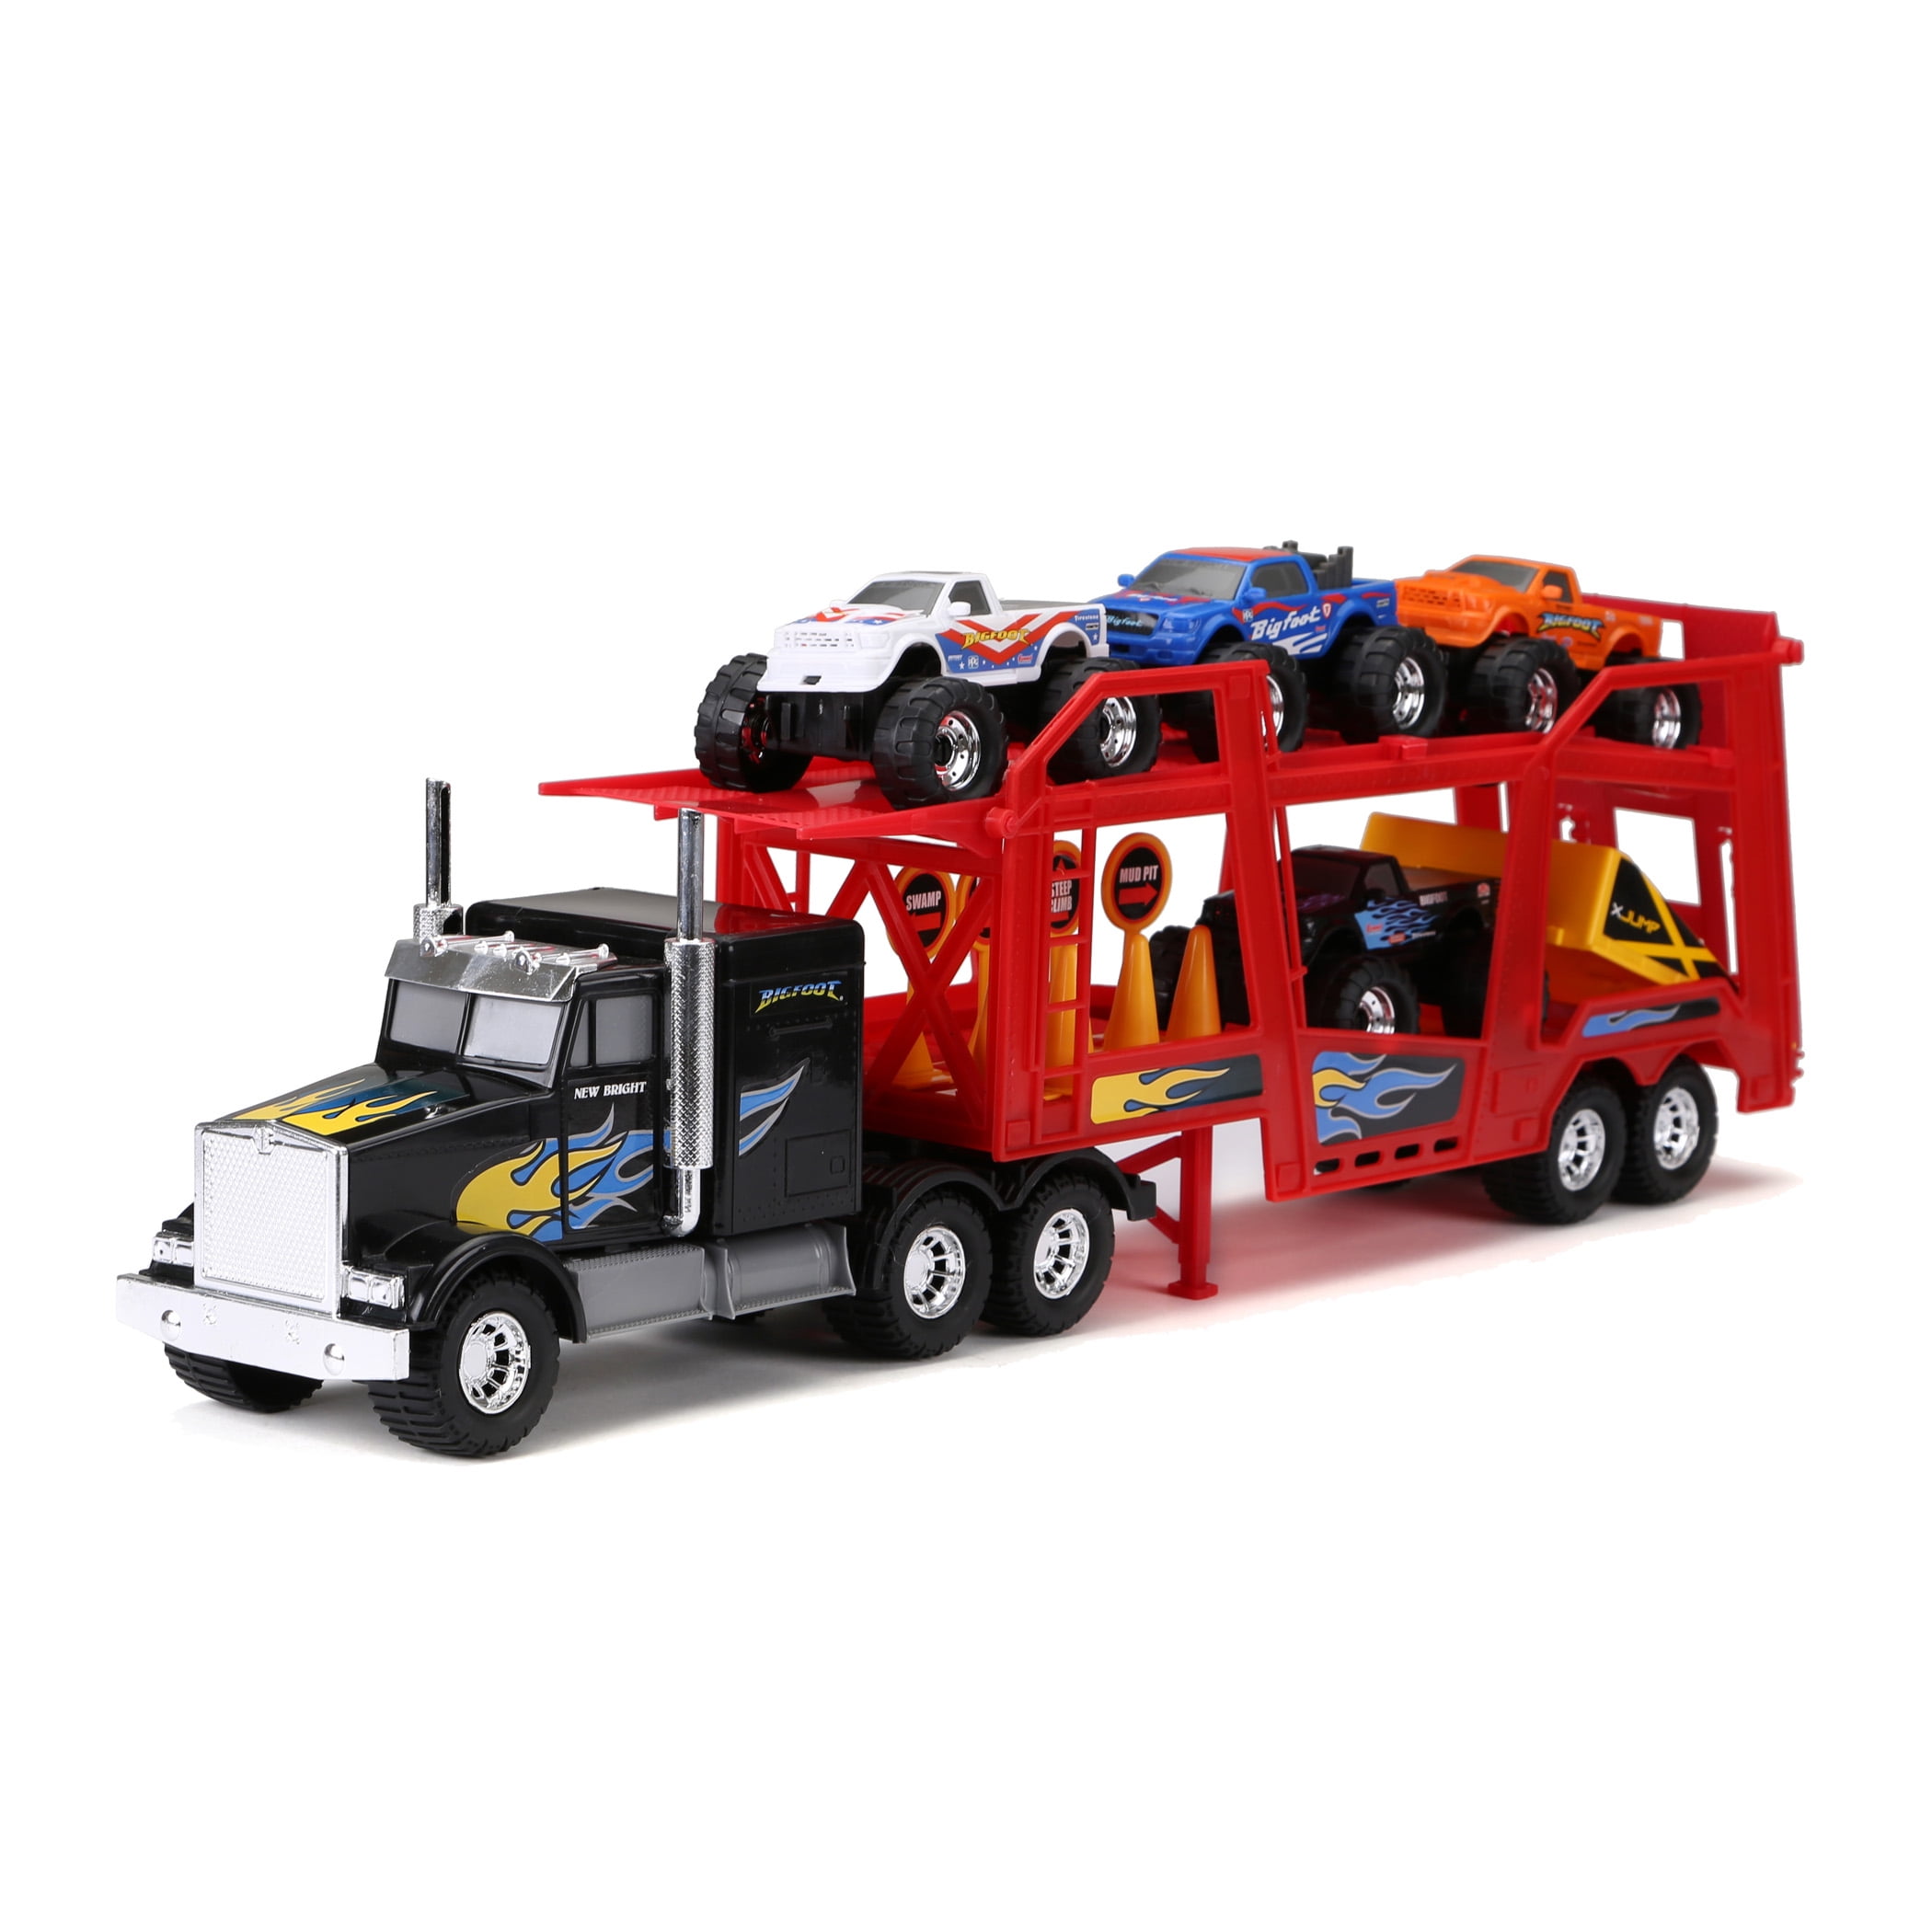 Toy stork truck carrying 4 colored cars 